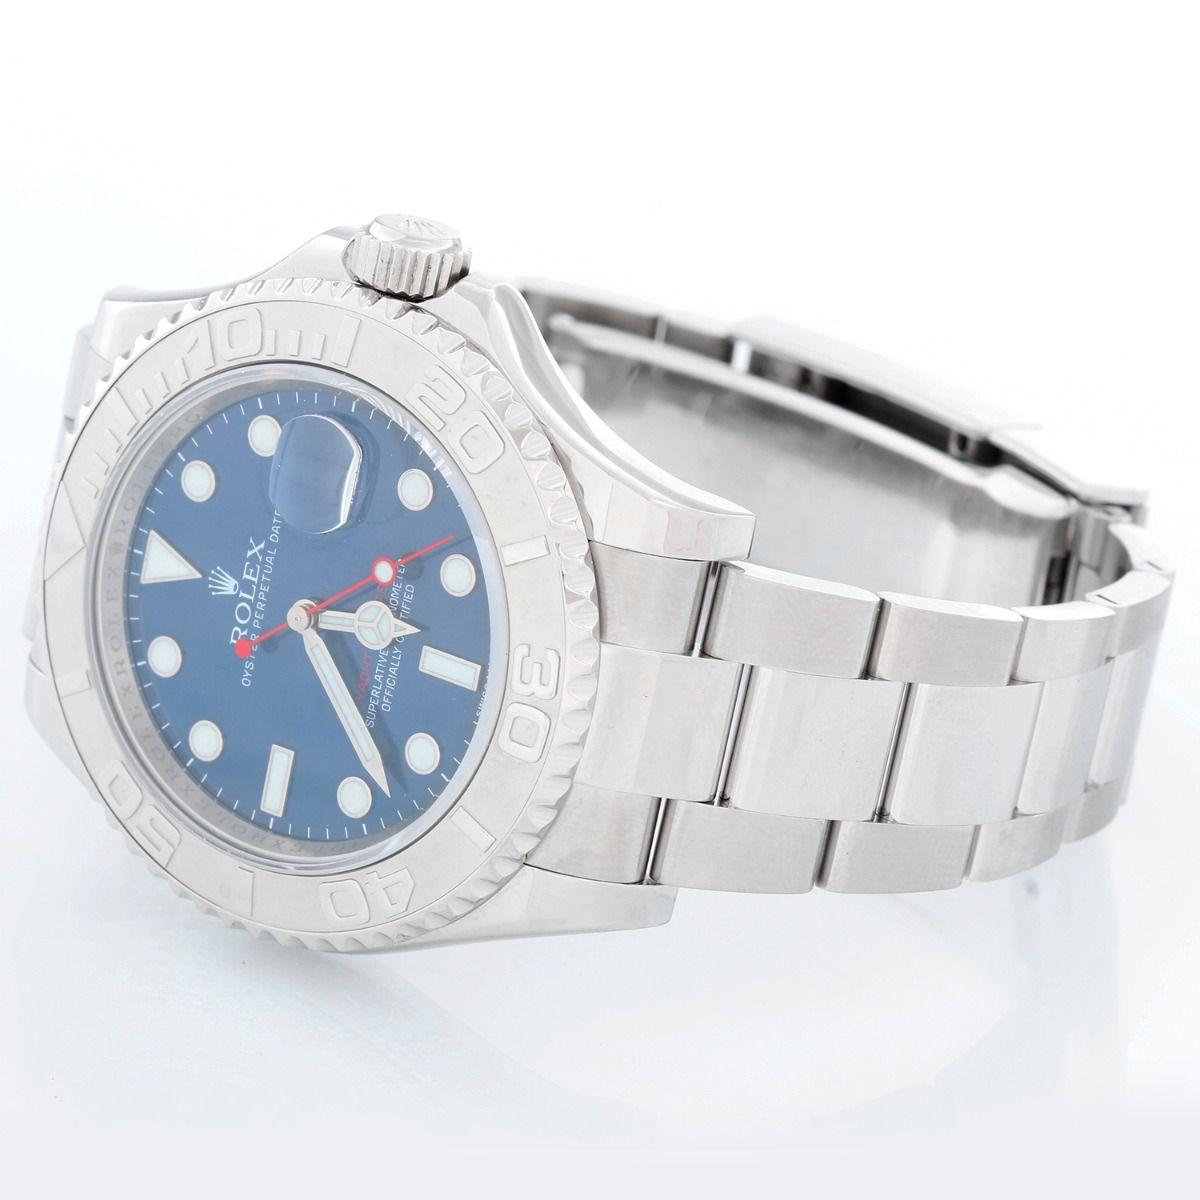 Rolex Yacht-Master Men's Stainless Steel Watch 116622 - Automatic winding, 31 jewels, Quickset, sapphire crystal. Stainless steel case with platinum bezel  (40mm diameter). Blue dial with luminous markers. Stainless steel Oyster bracelet with